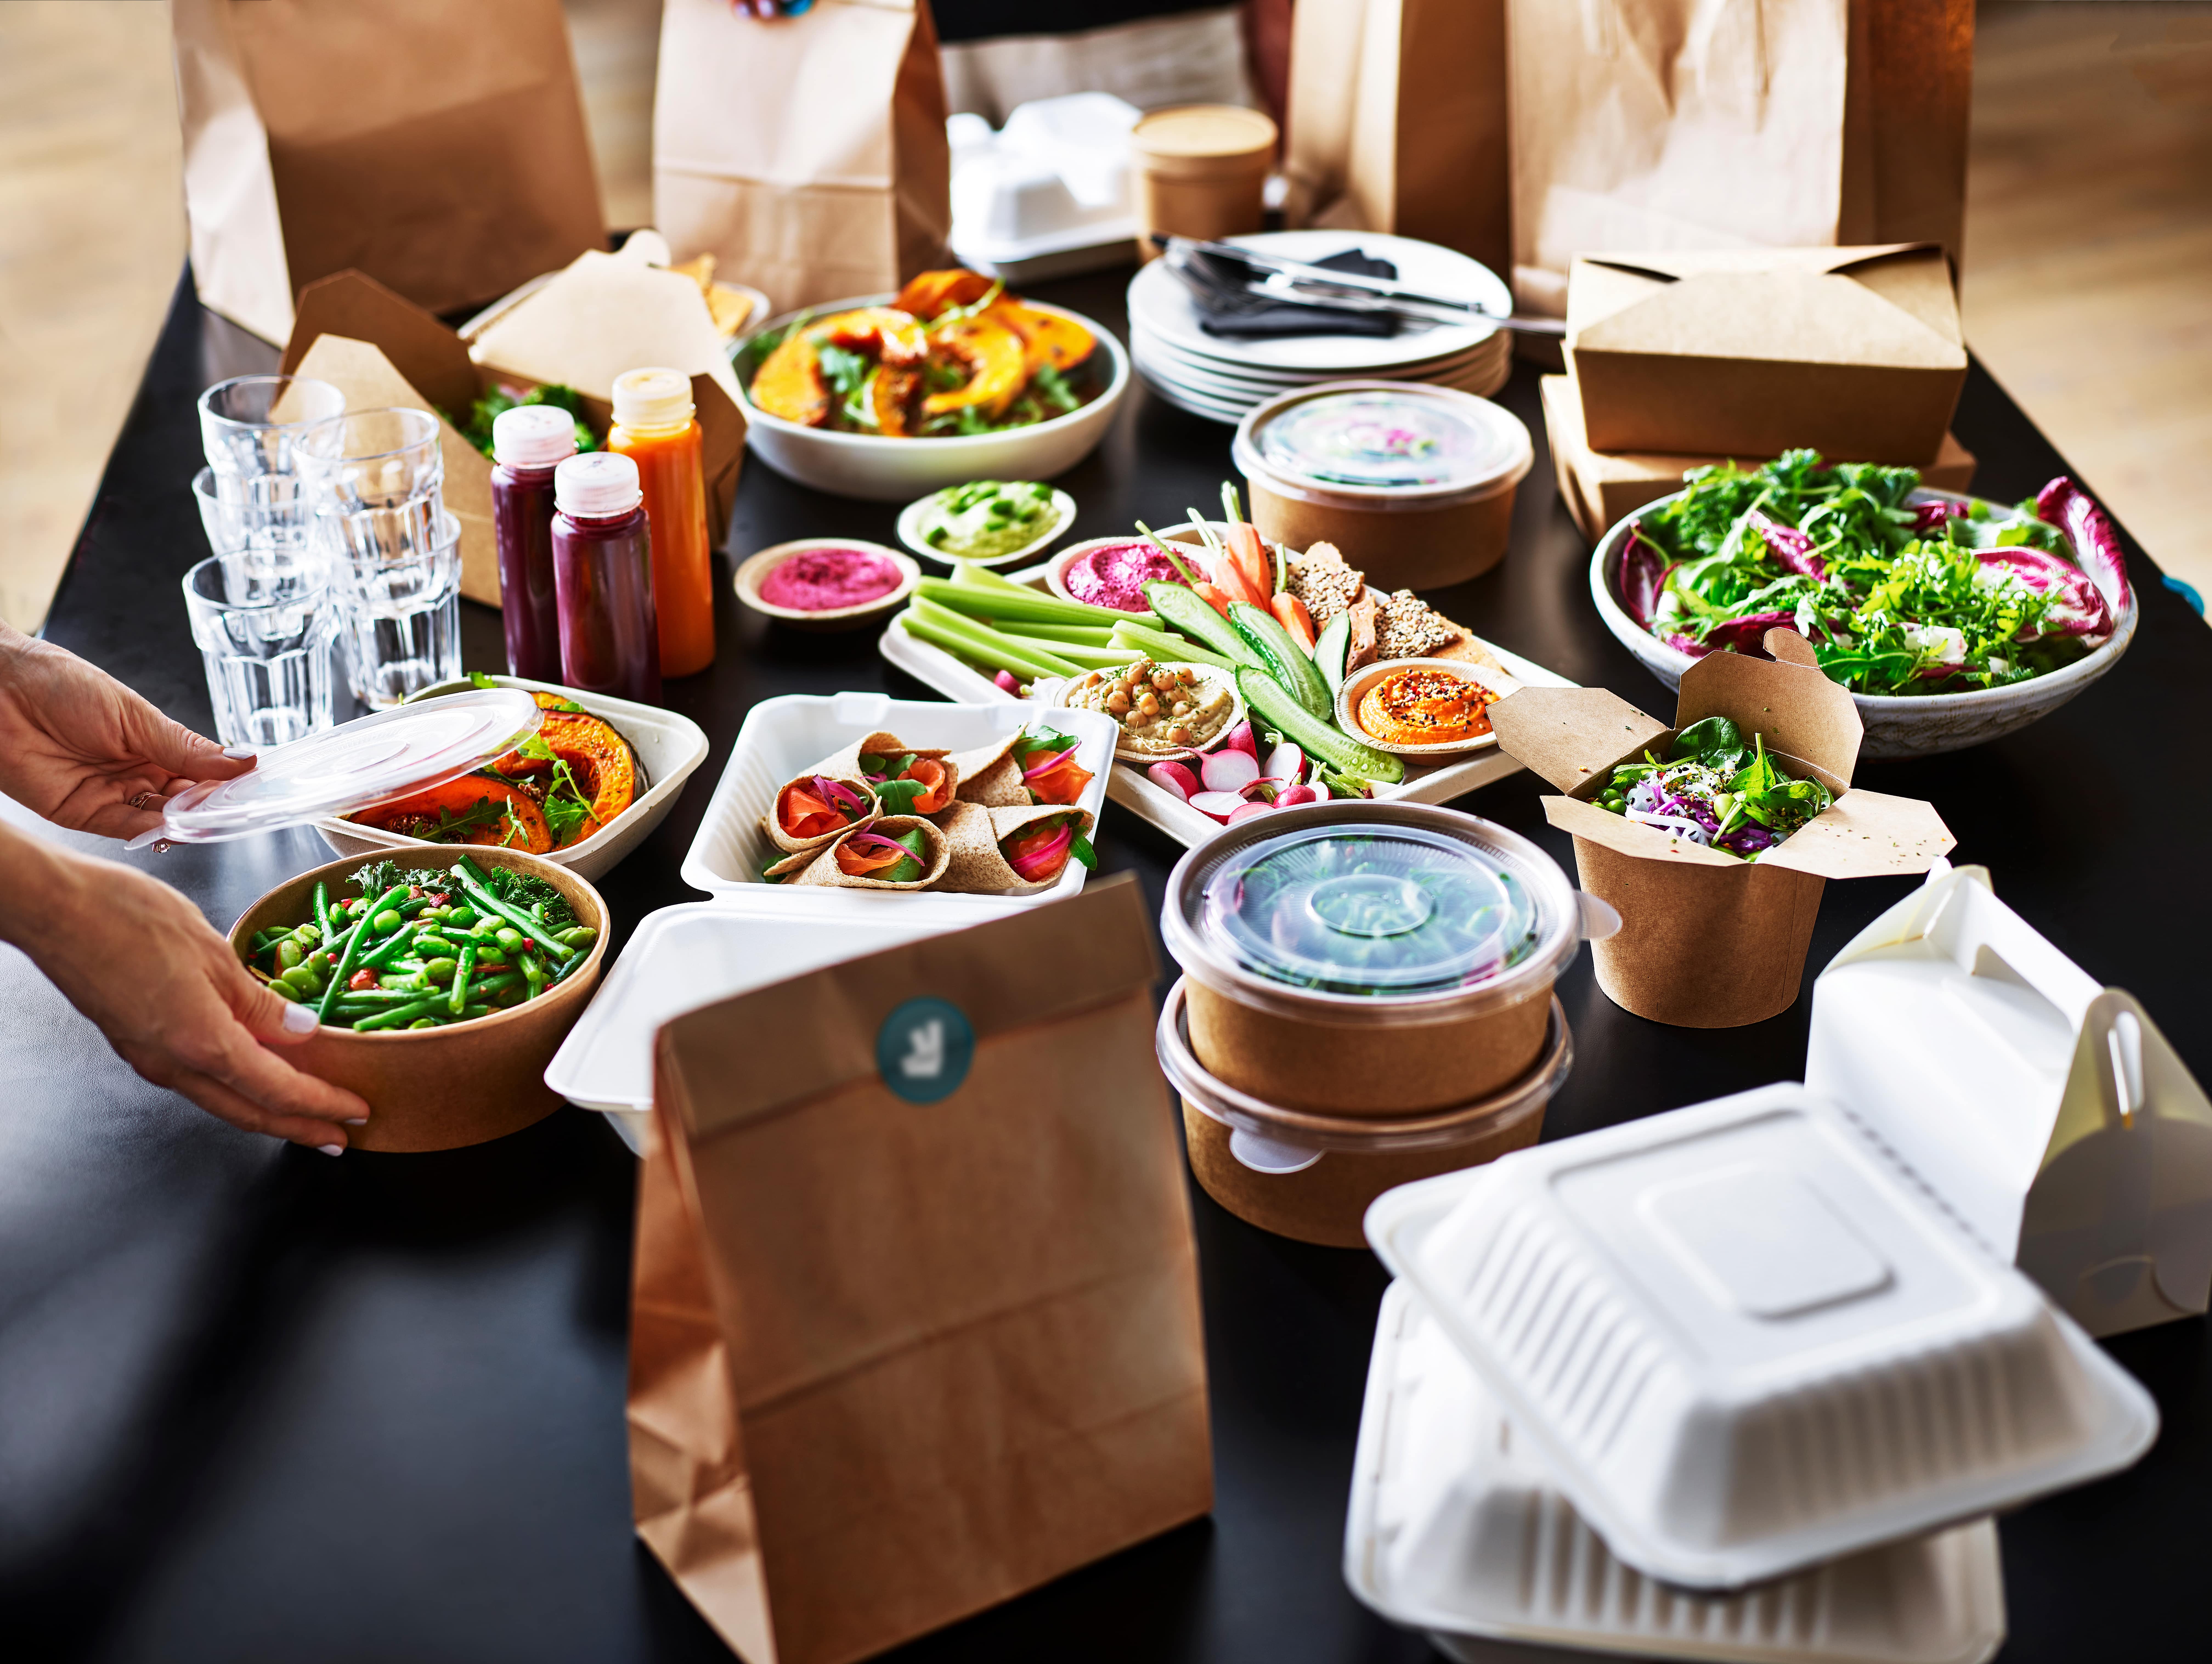 DELIVEROO FOR WORK SURVEY REVEALS THE IMPORTANCE OF FOOD WITHIN THE WORKPLACE